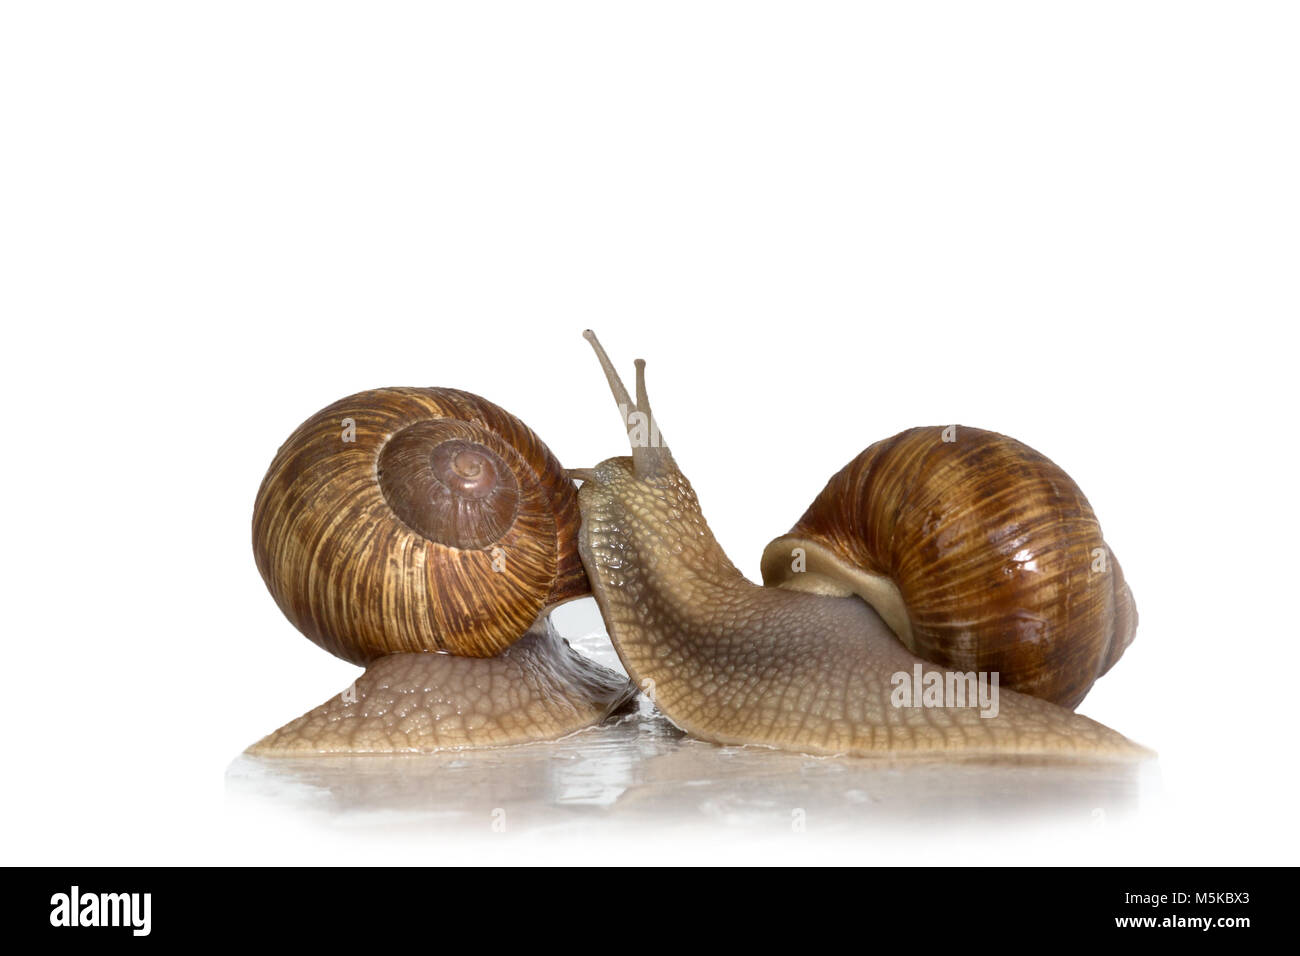 A pair of snails Stock Photo